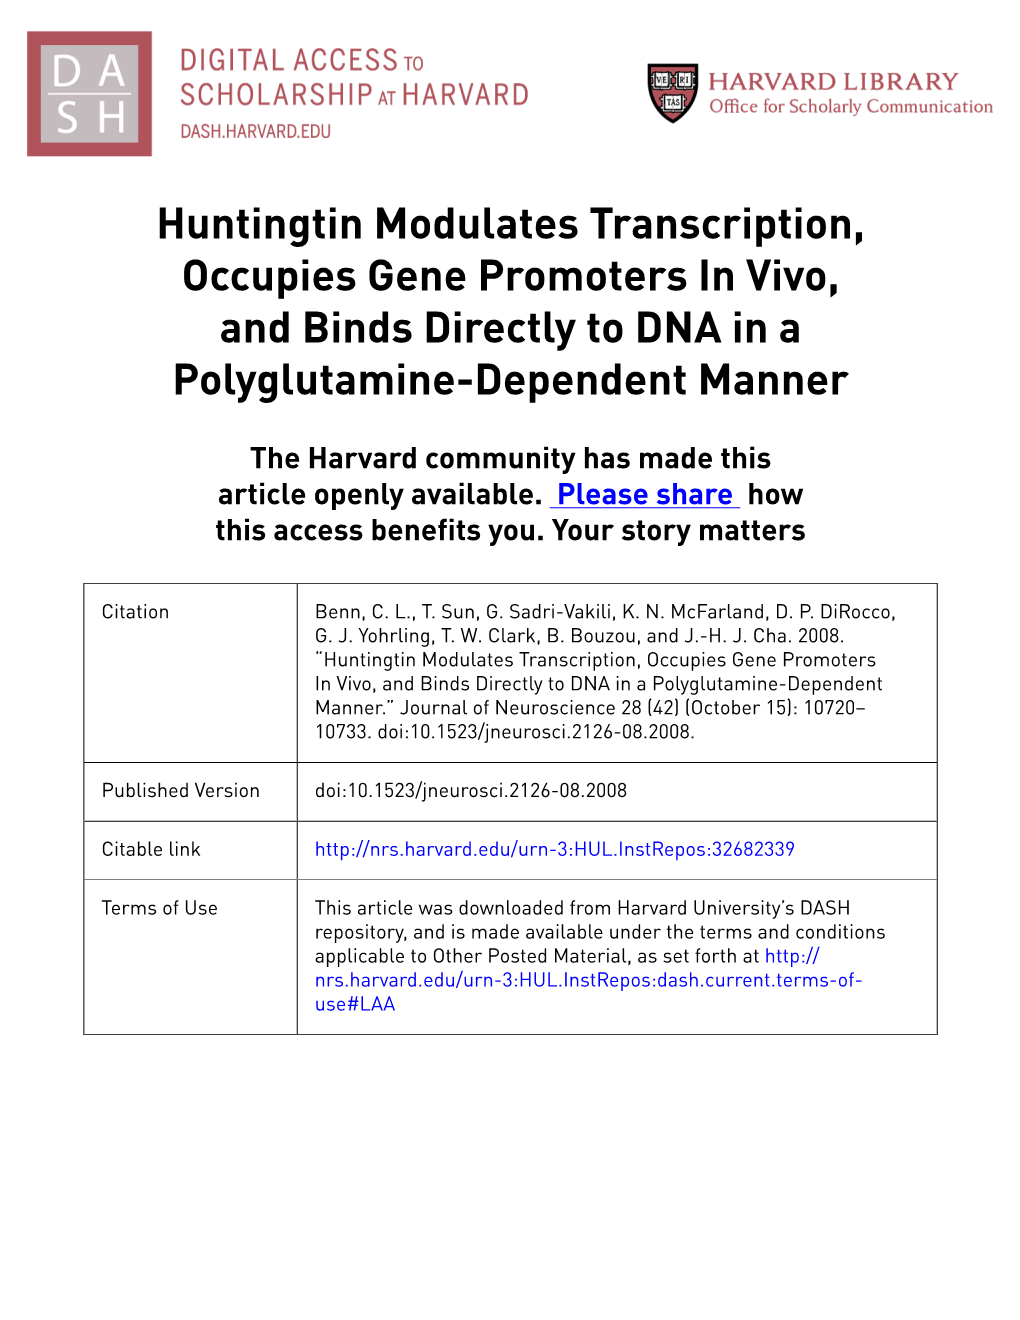 Huntingtin Modulates Transcription, Occupies Gene Promoters in Vivo, and Binds Directly to DNA in a Polyglutamine-Dependent Manner